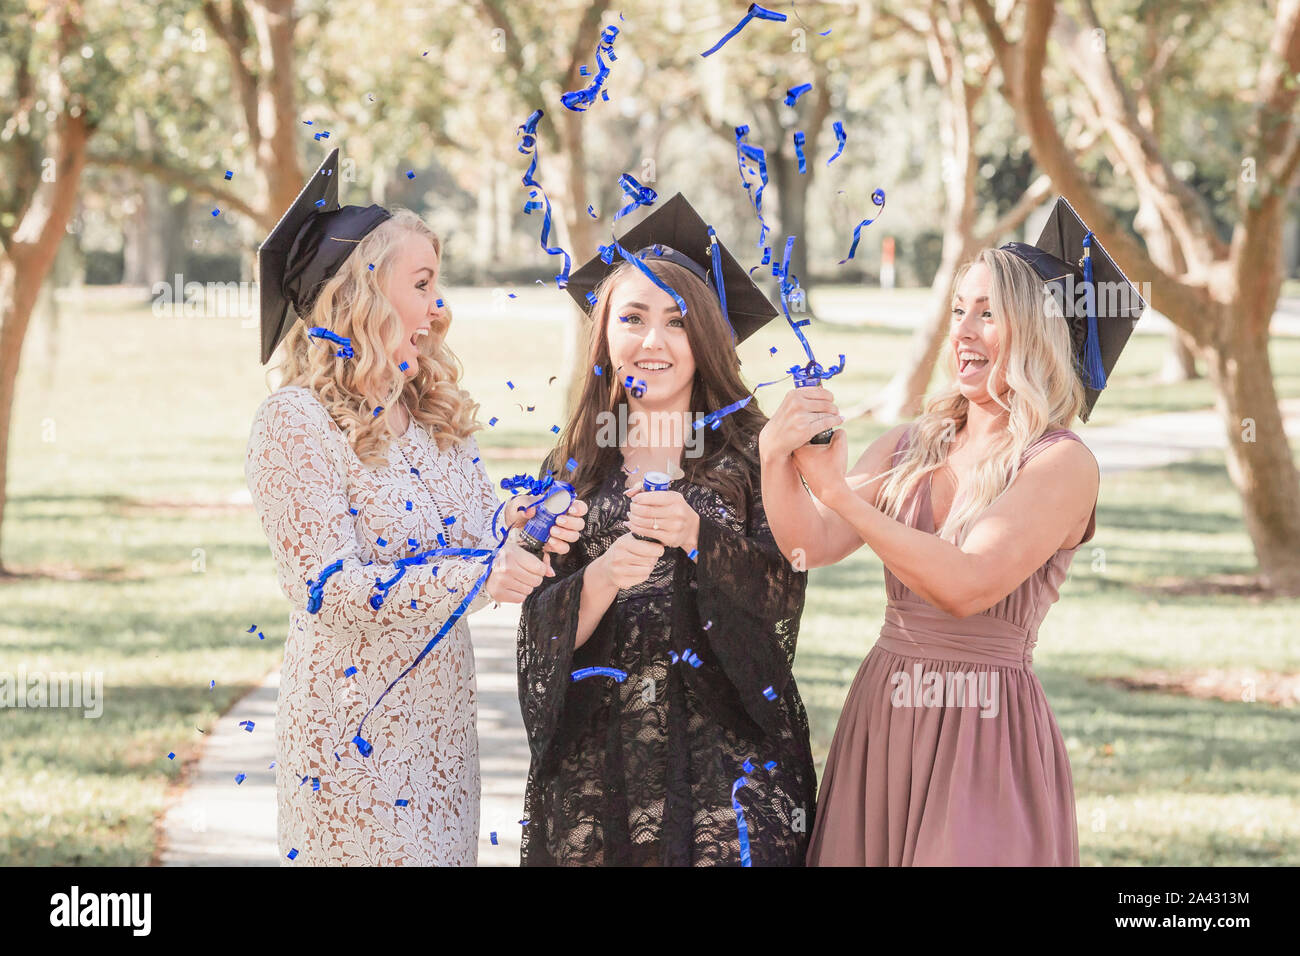 What Do I Wear for College Graduation Pictures?! -  naterobinsonphotography.com